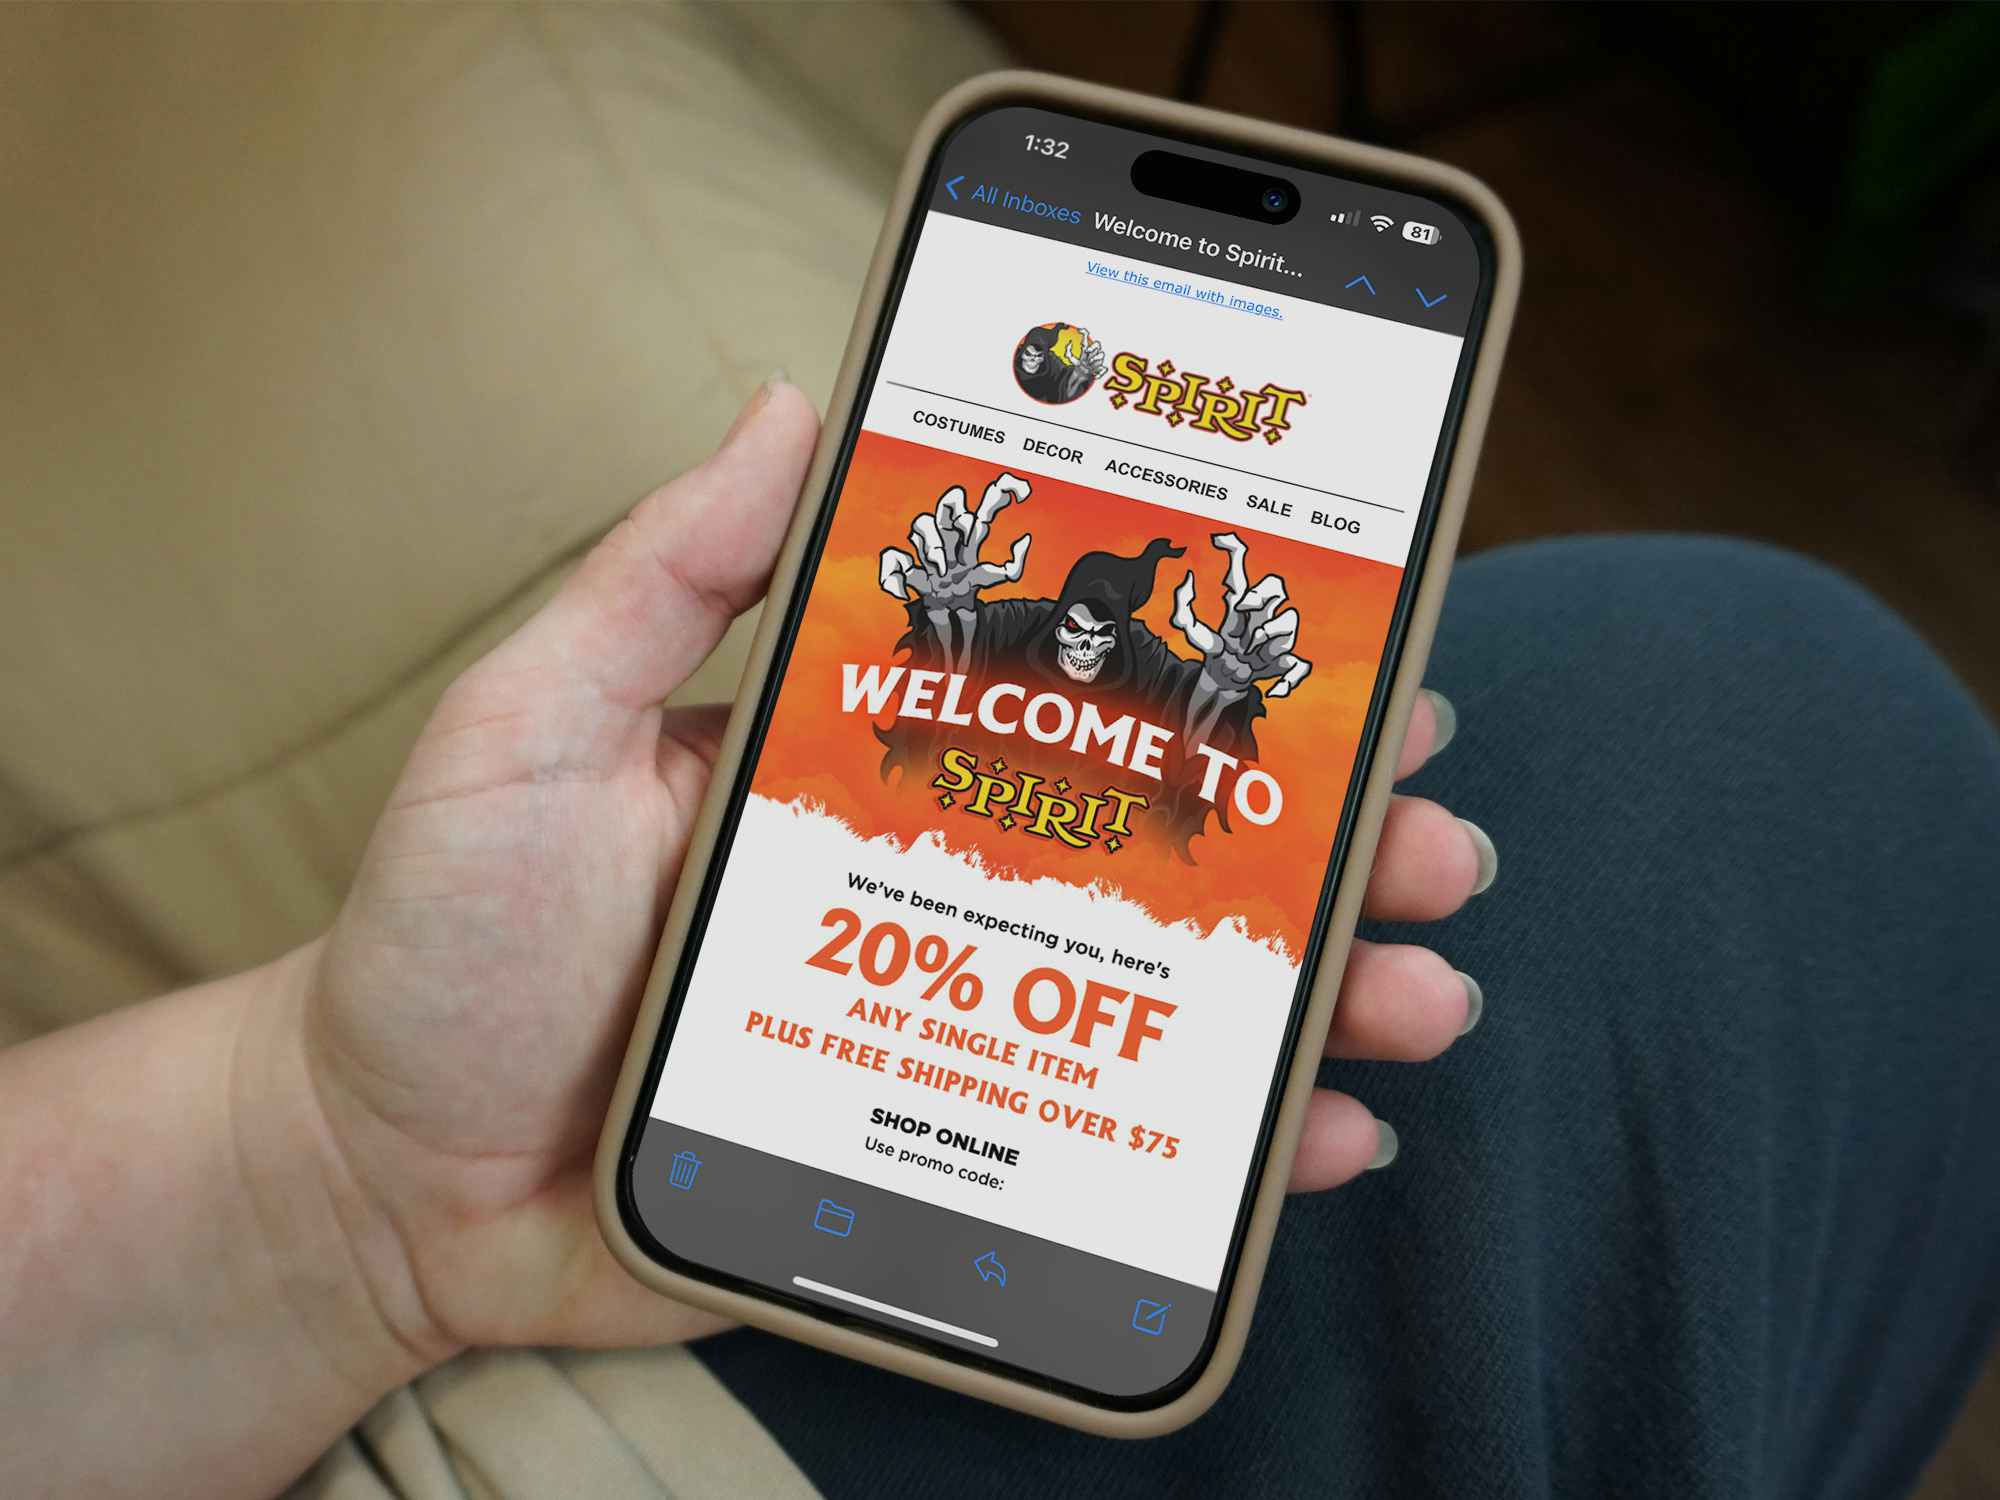 Someone reading the Spirit Halloween welcome email with a coupon for 20% off